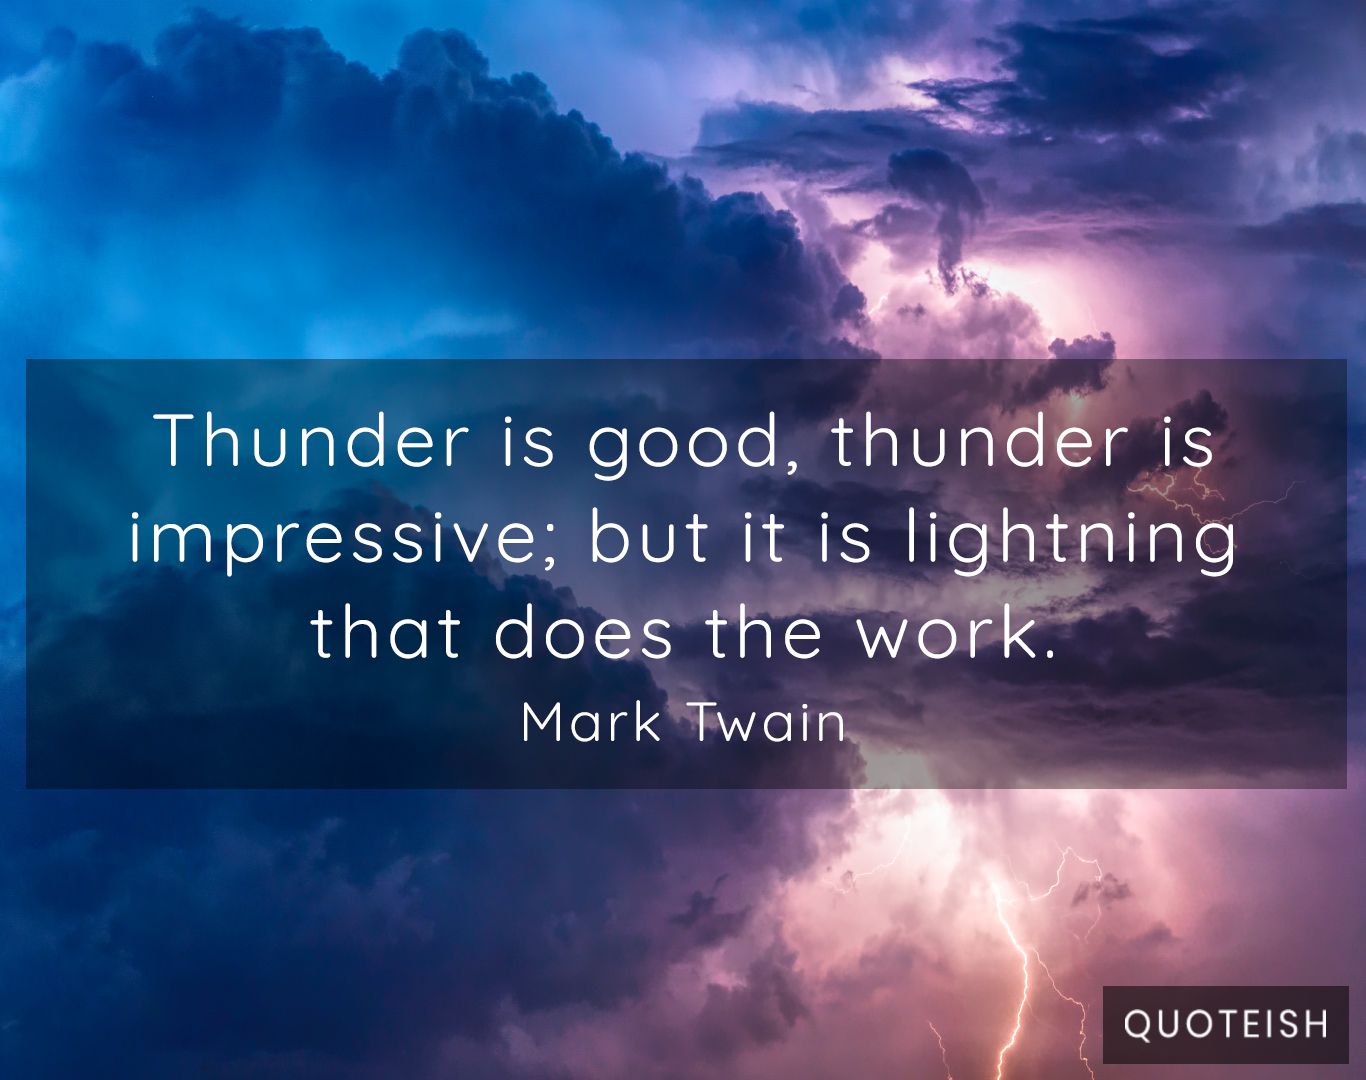 thunder and rain quotes